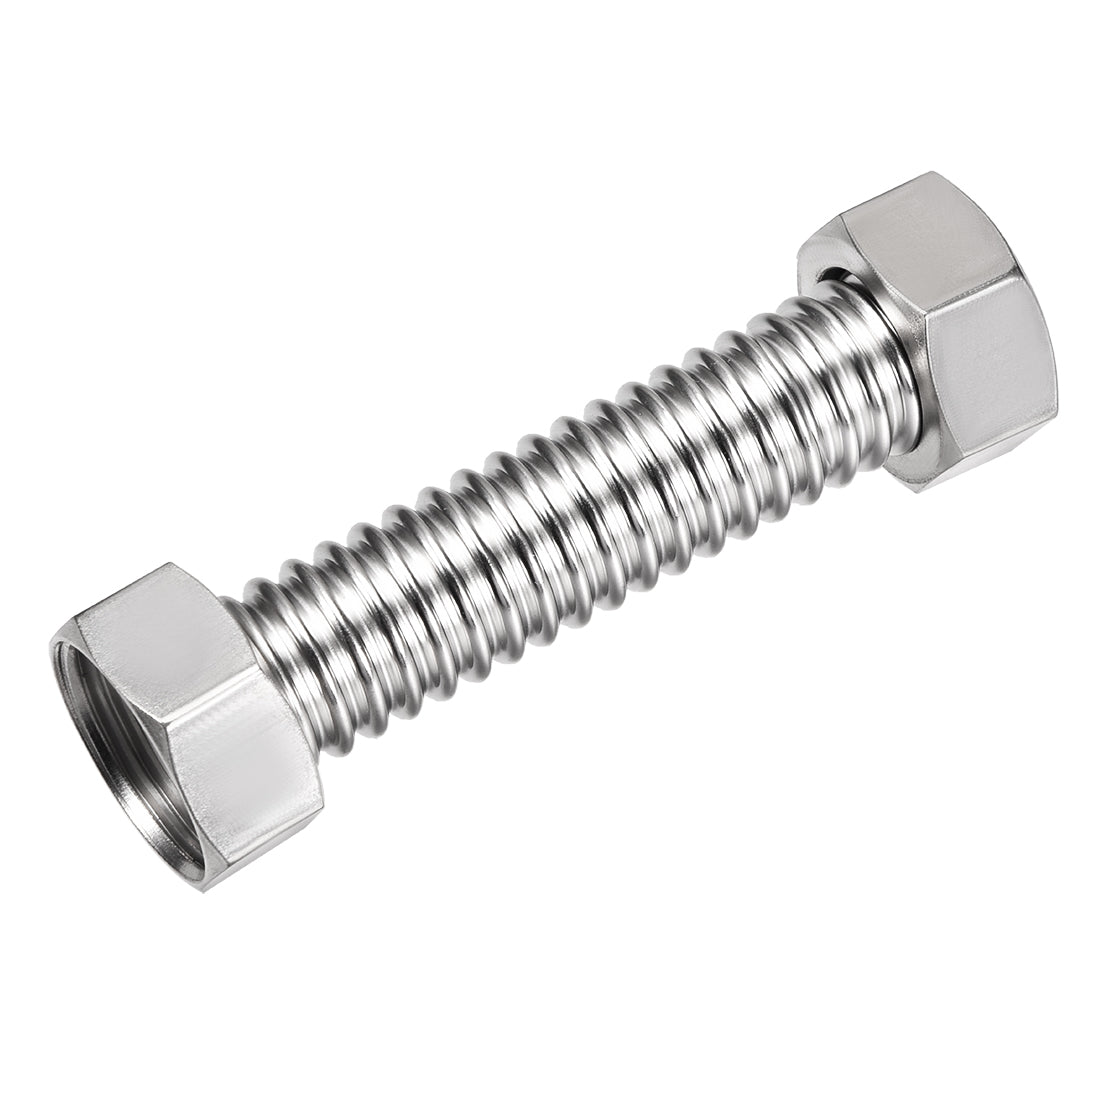 Uxcell Uxcell Corrugated Stainless Steel Flexible Water Line 3.9inch Long G3/4 Female Threaded Connector with Washer